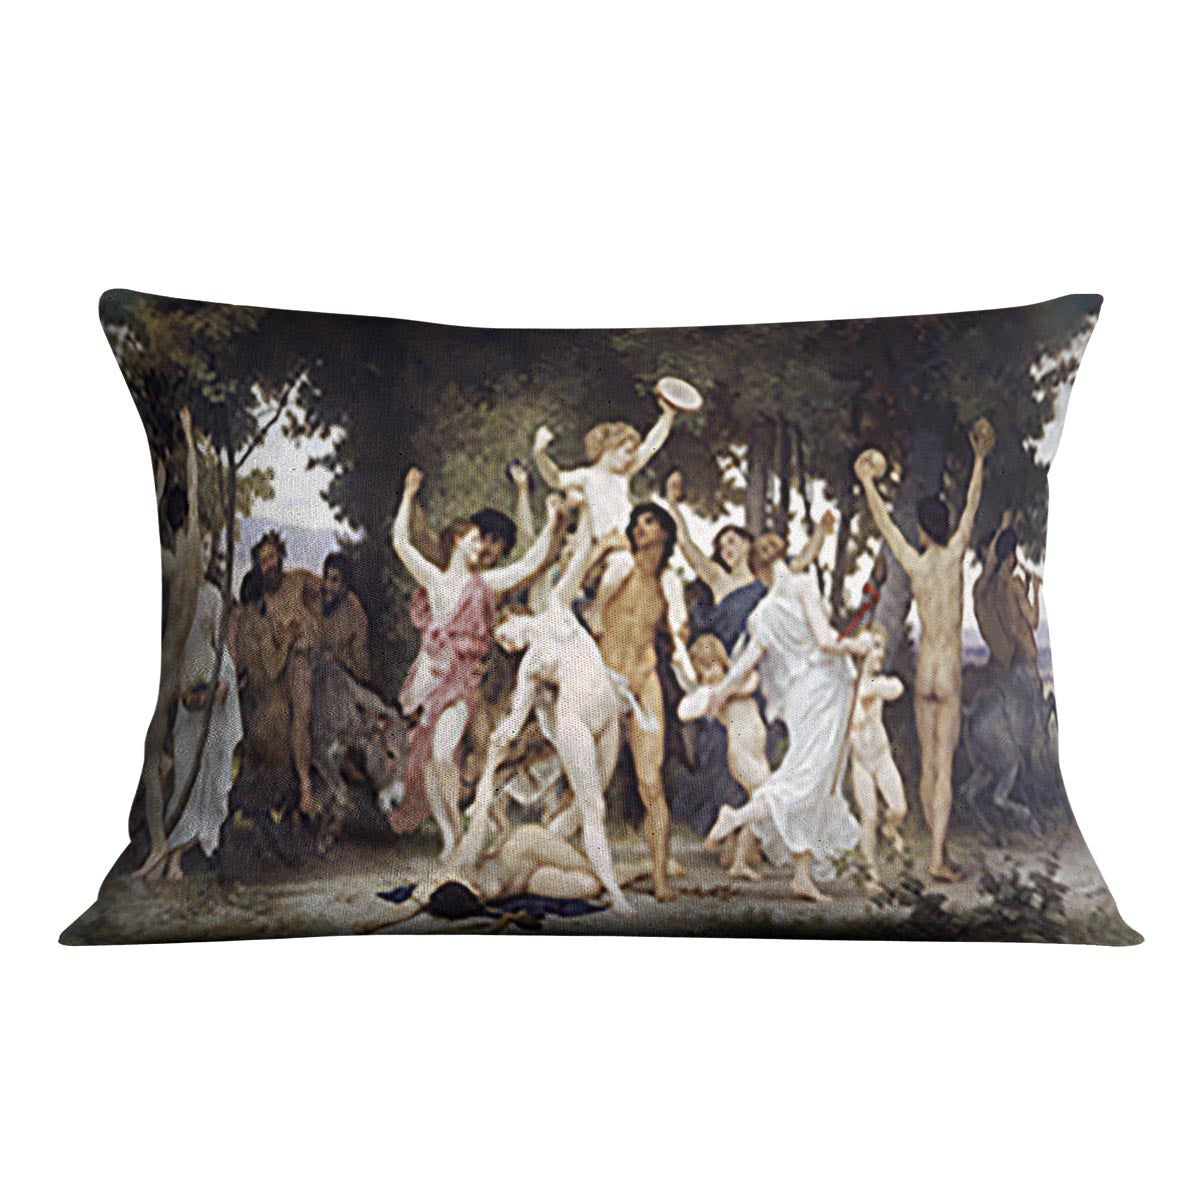 The Youth of Bacchus By Bouguereau Cushion